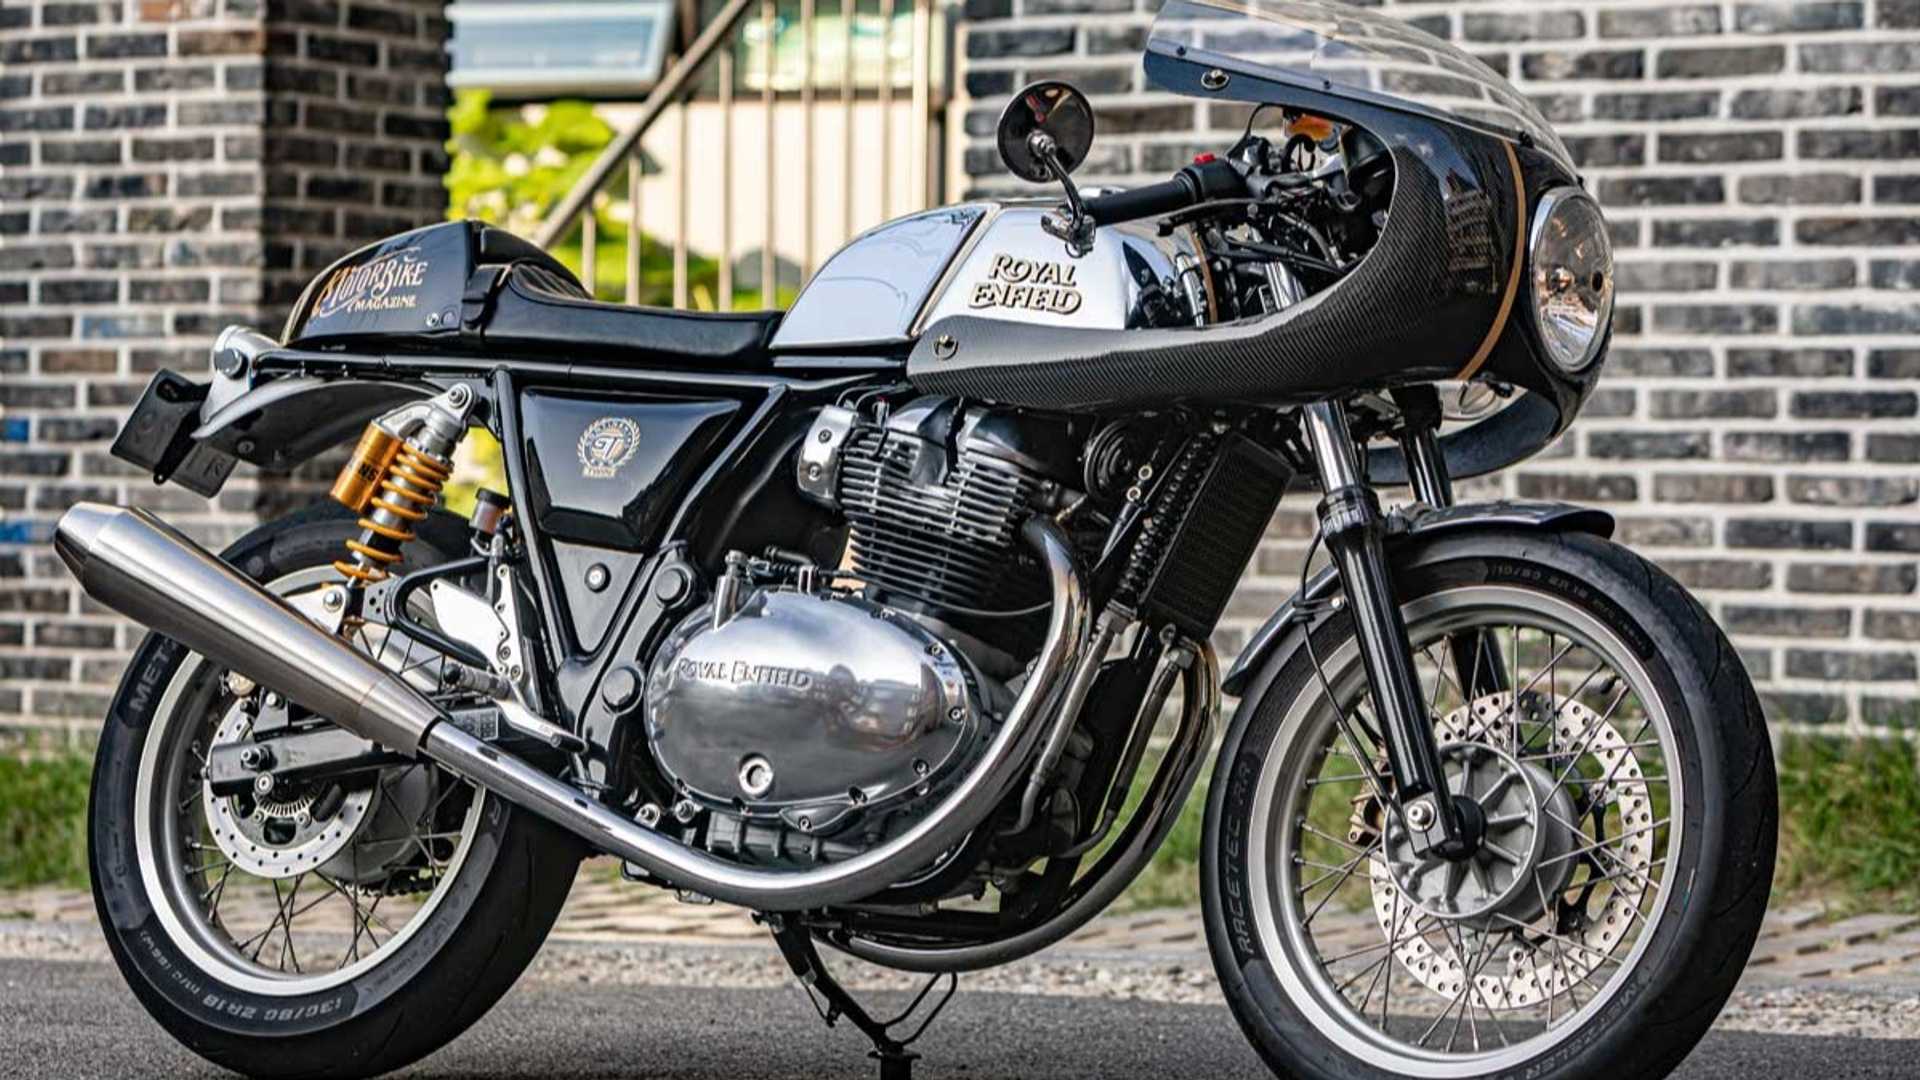 This Continental GT 650 Is A Triumph Inspired Custom